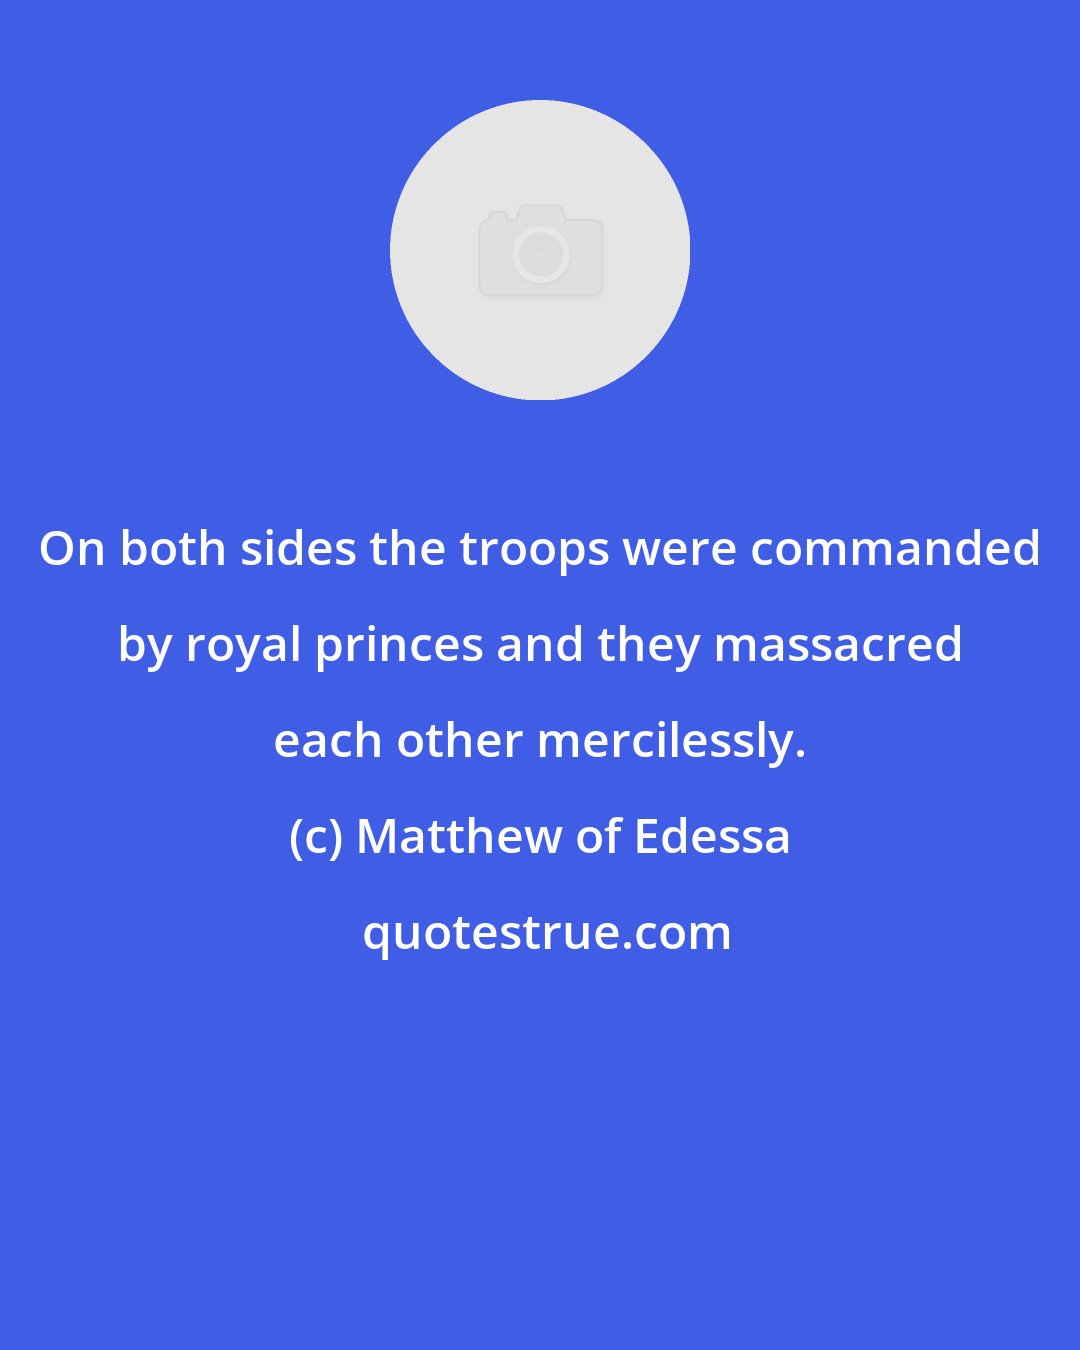 Matthew of Edessa: On both sides the troops were commanded by royal princes and they massacred each other mercilessly.